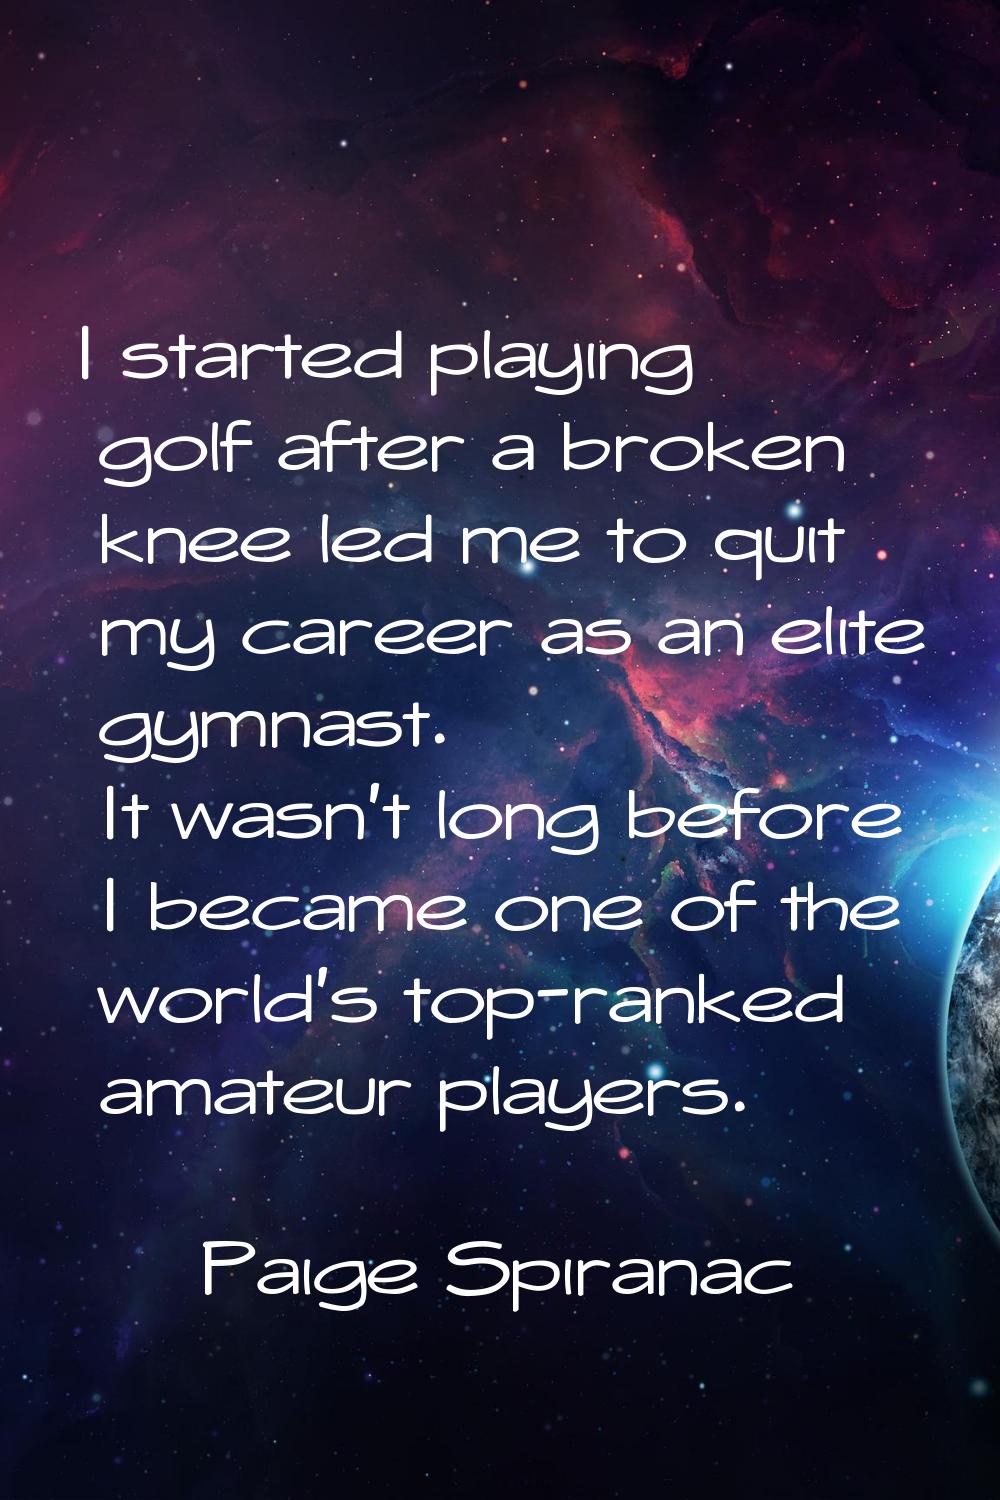 I started playing golf after a broken knee led me to quit my career as an elite gymnast. It wasn't 